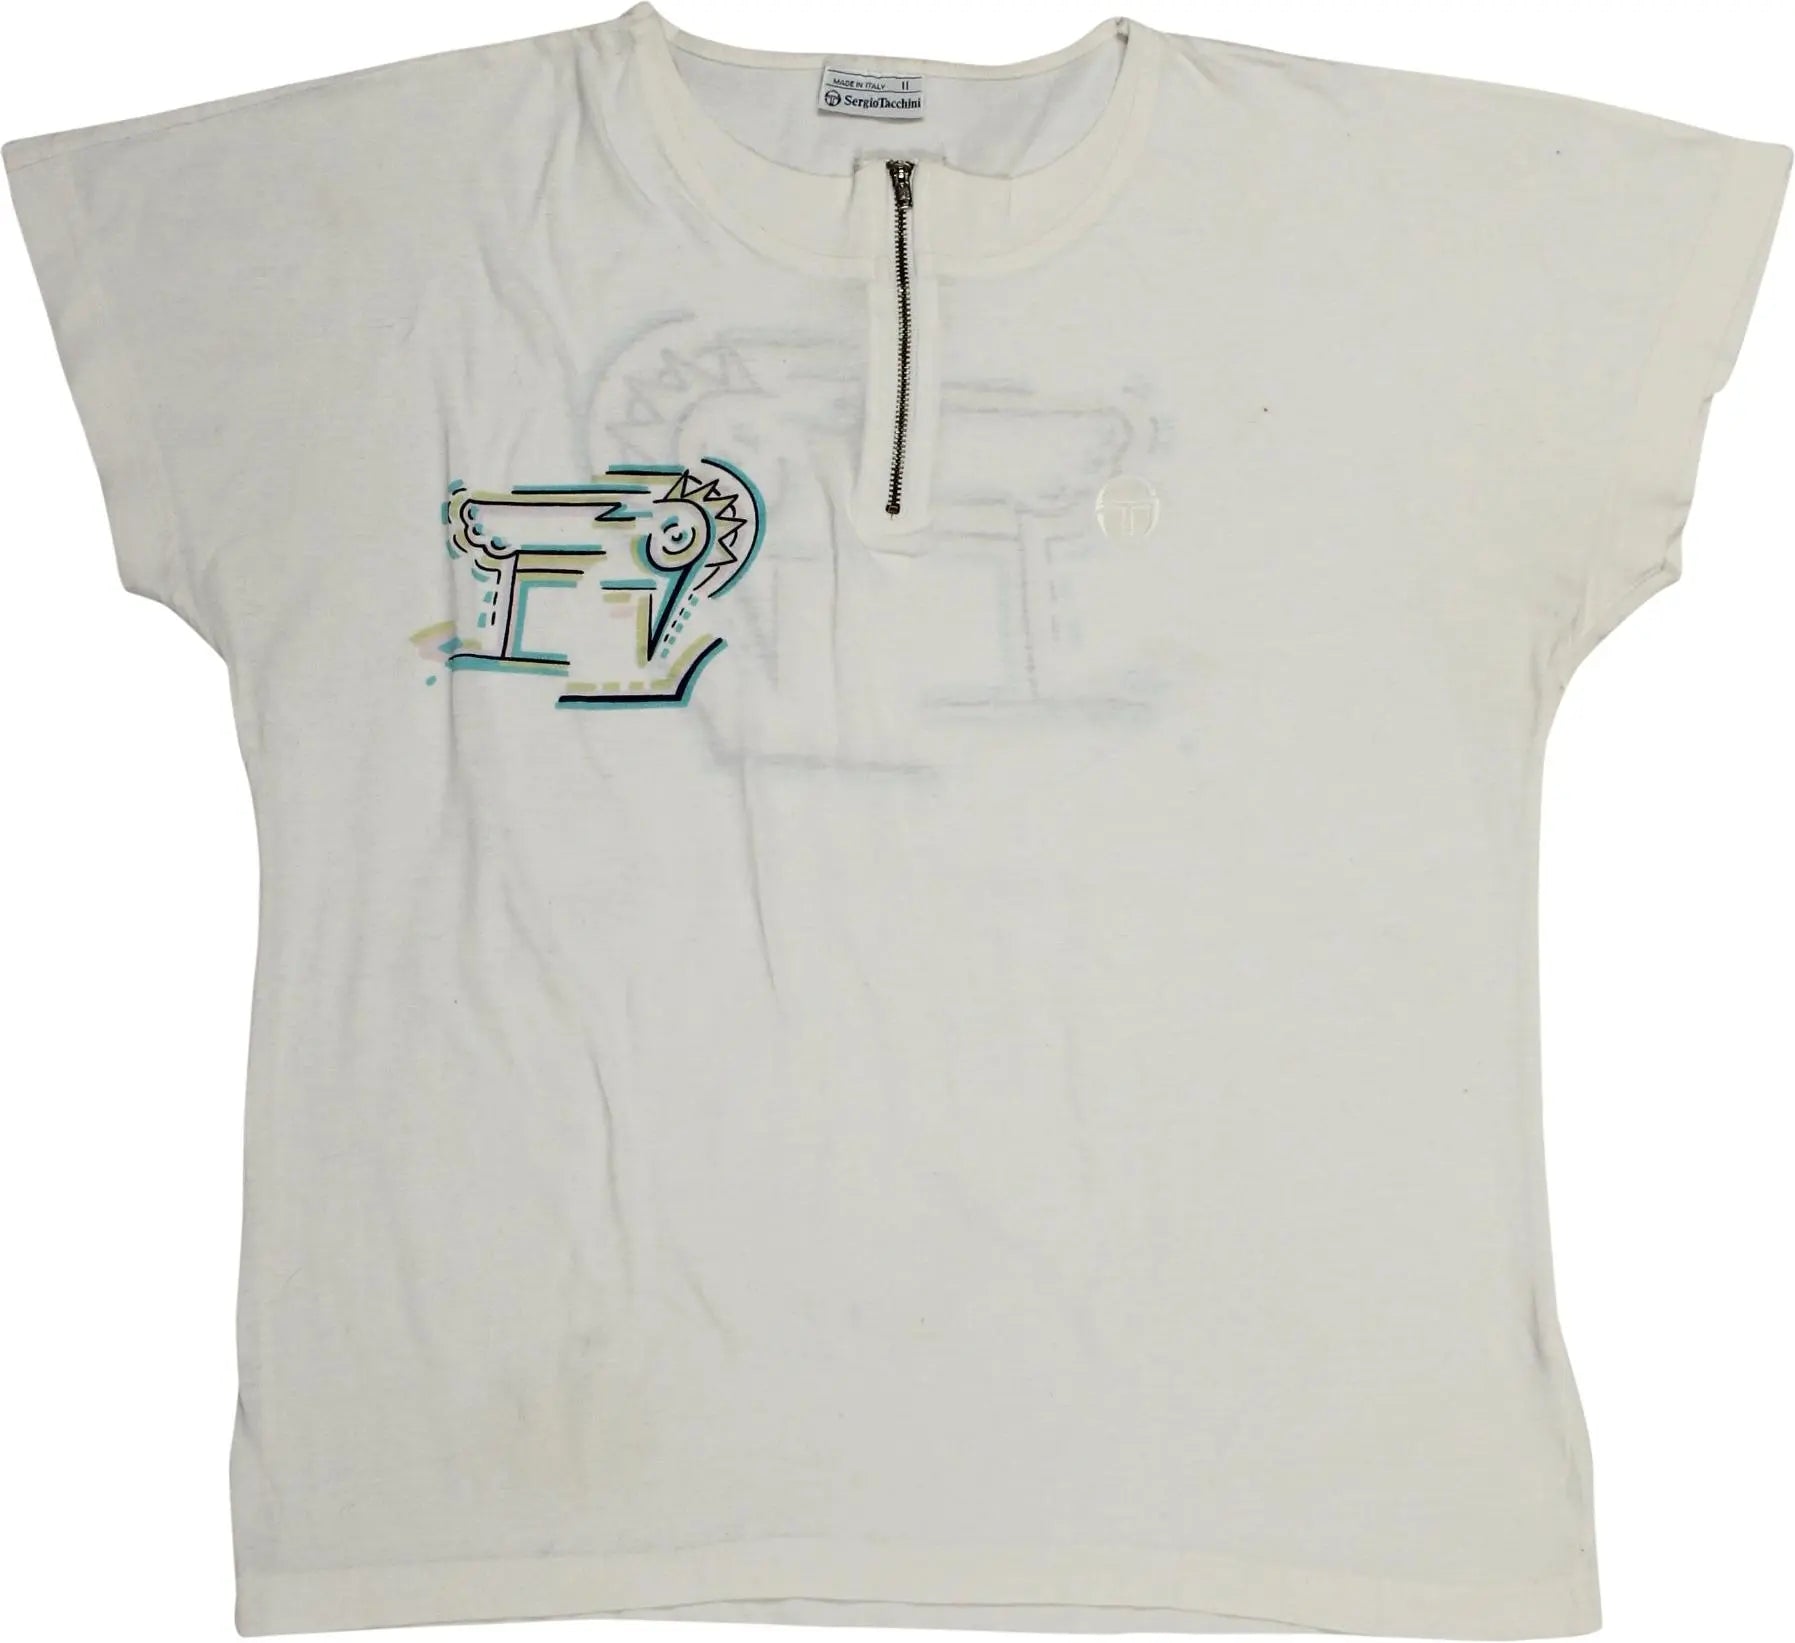 Sergio Tacchini - Zipper T-shirt by Sergio Tacchini- ThriftTale.com - Vintage and second handclothing